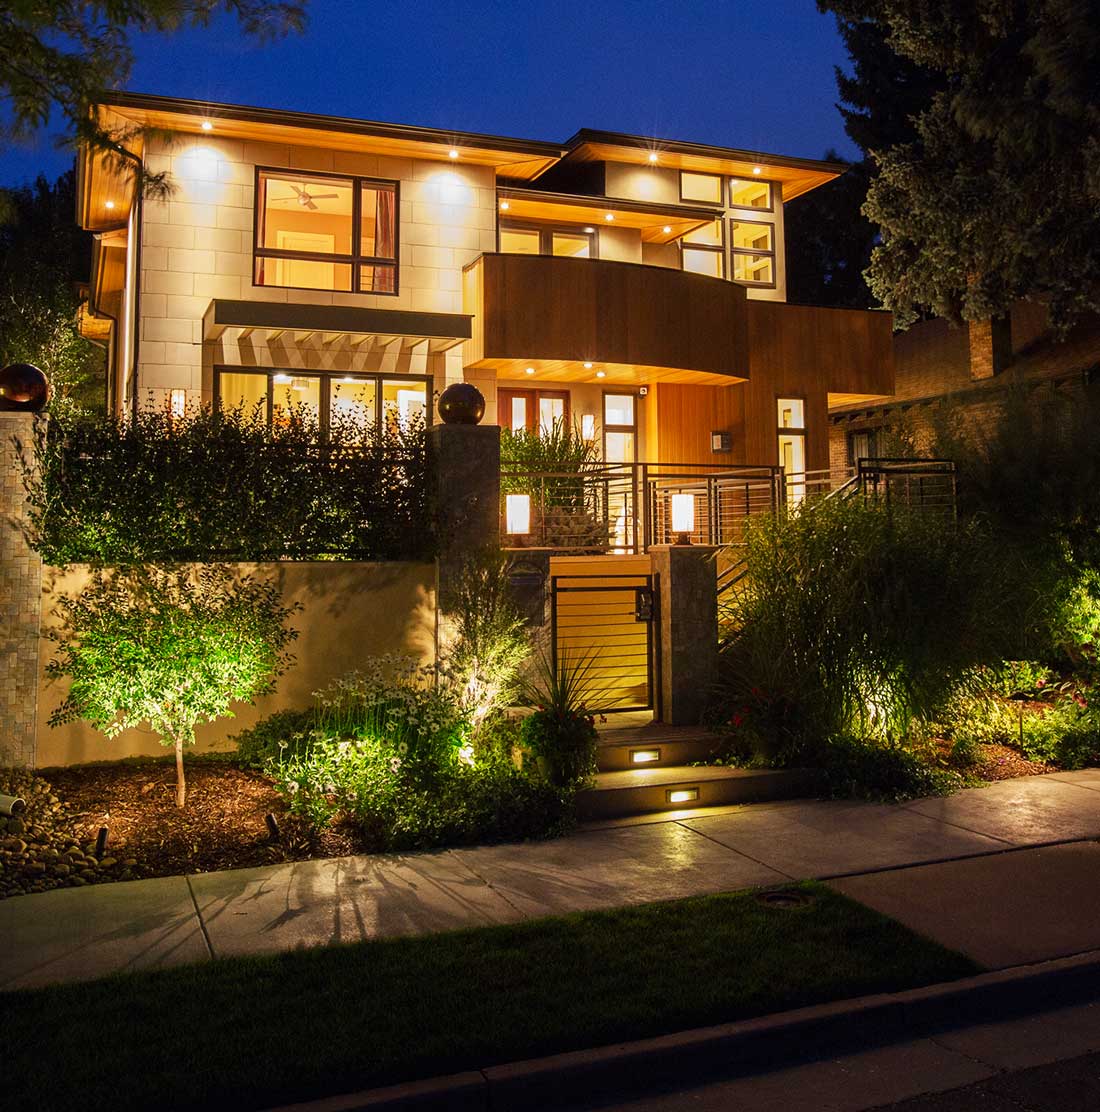 Residential home with exterior and interior automated lighting system